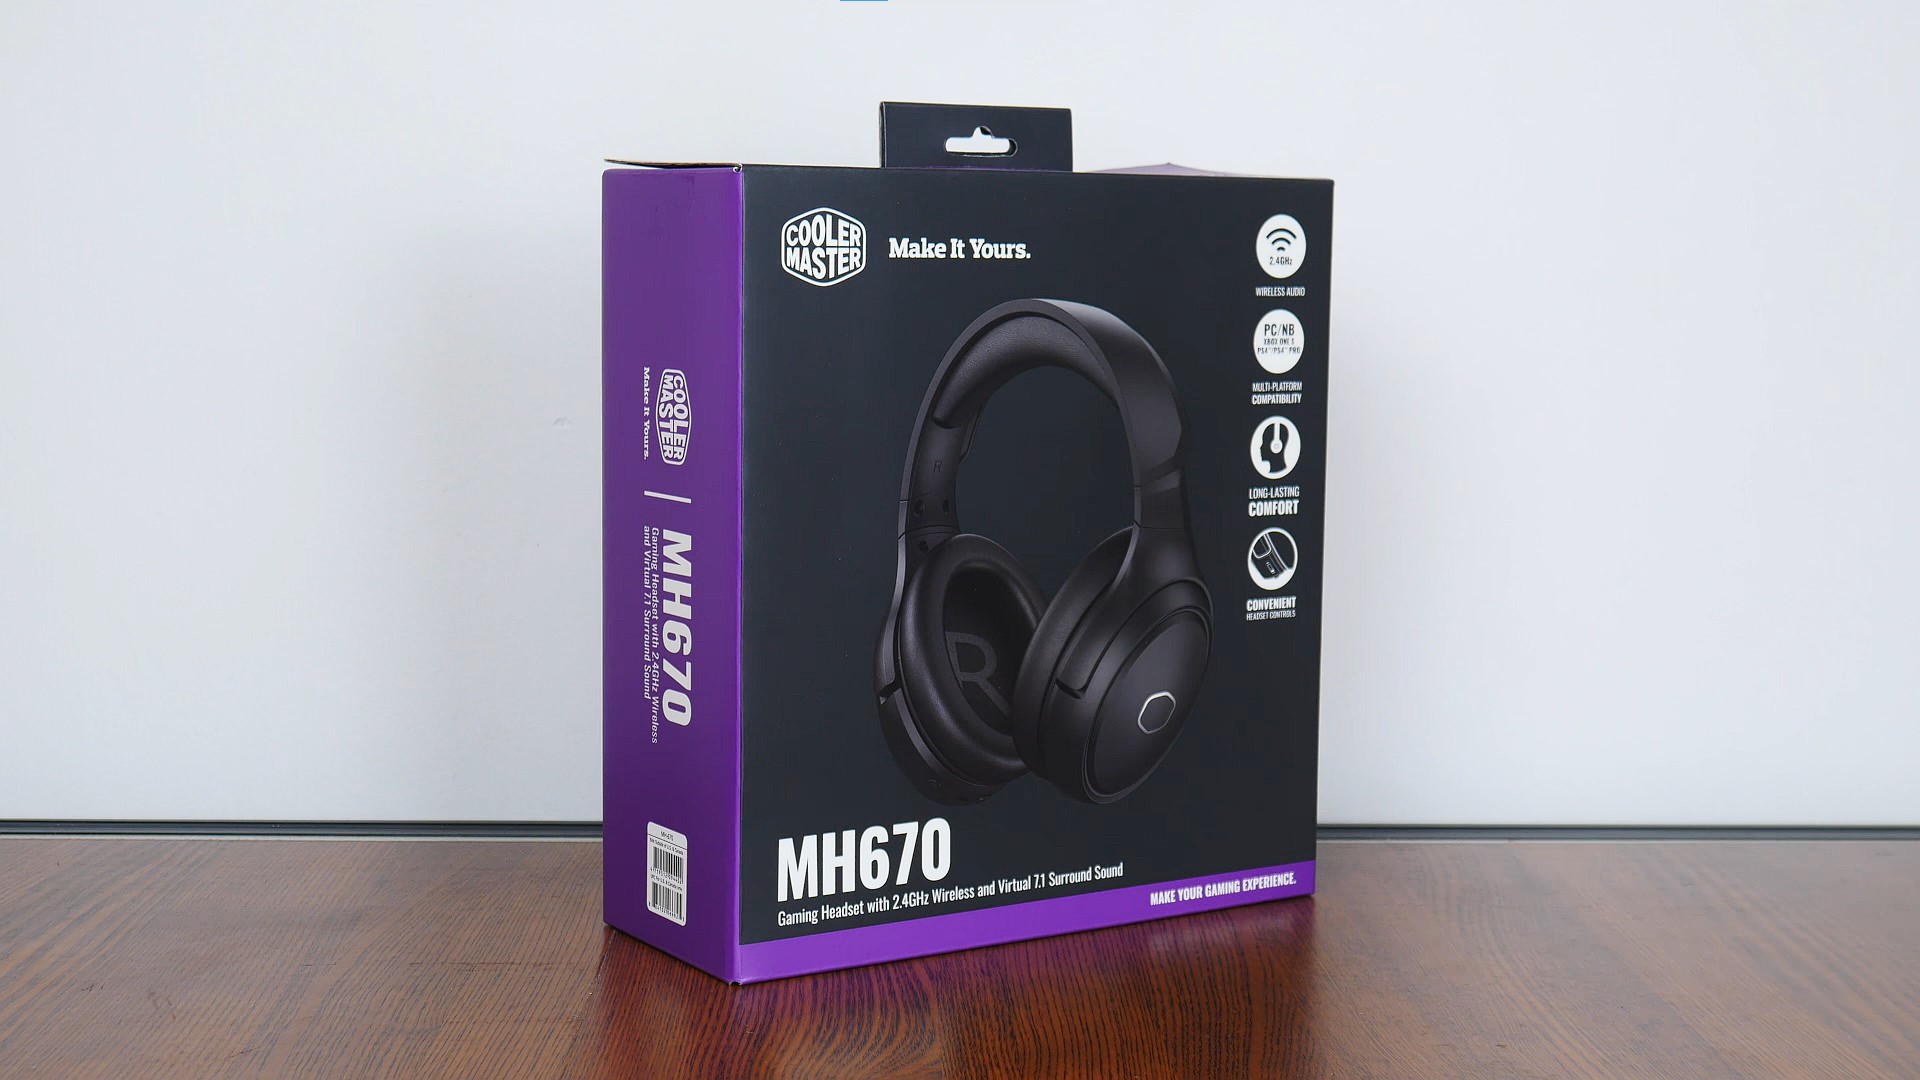 Cooler Master MH670 Wireless Gaming Headset Packaging (1)